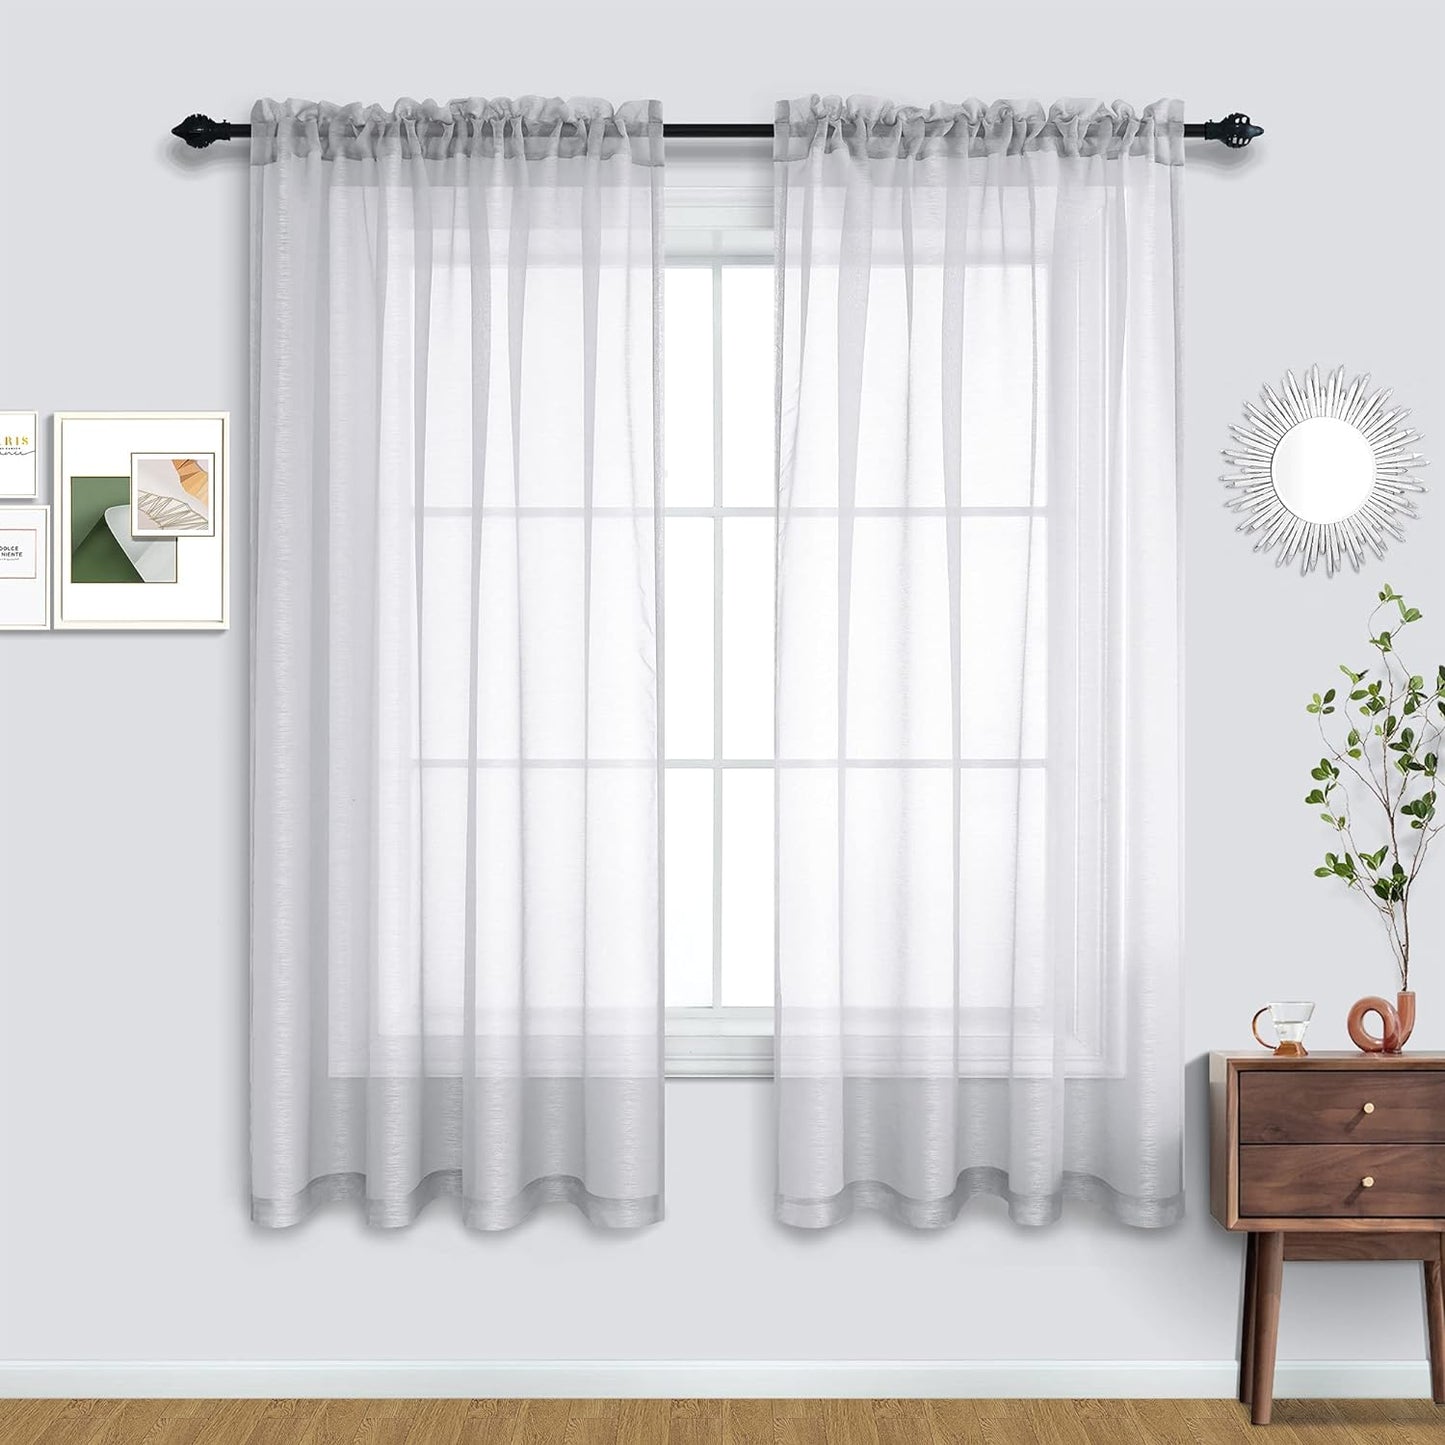 Terracotta Curtains 84 Inch Length for Living Room 2 Panel Sets Rod Pocket Sheer Curtains for Living Room Rust Burnt Orange Red  PITALK TEXTILE Silver 52X63 